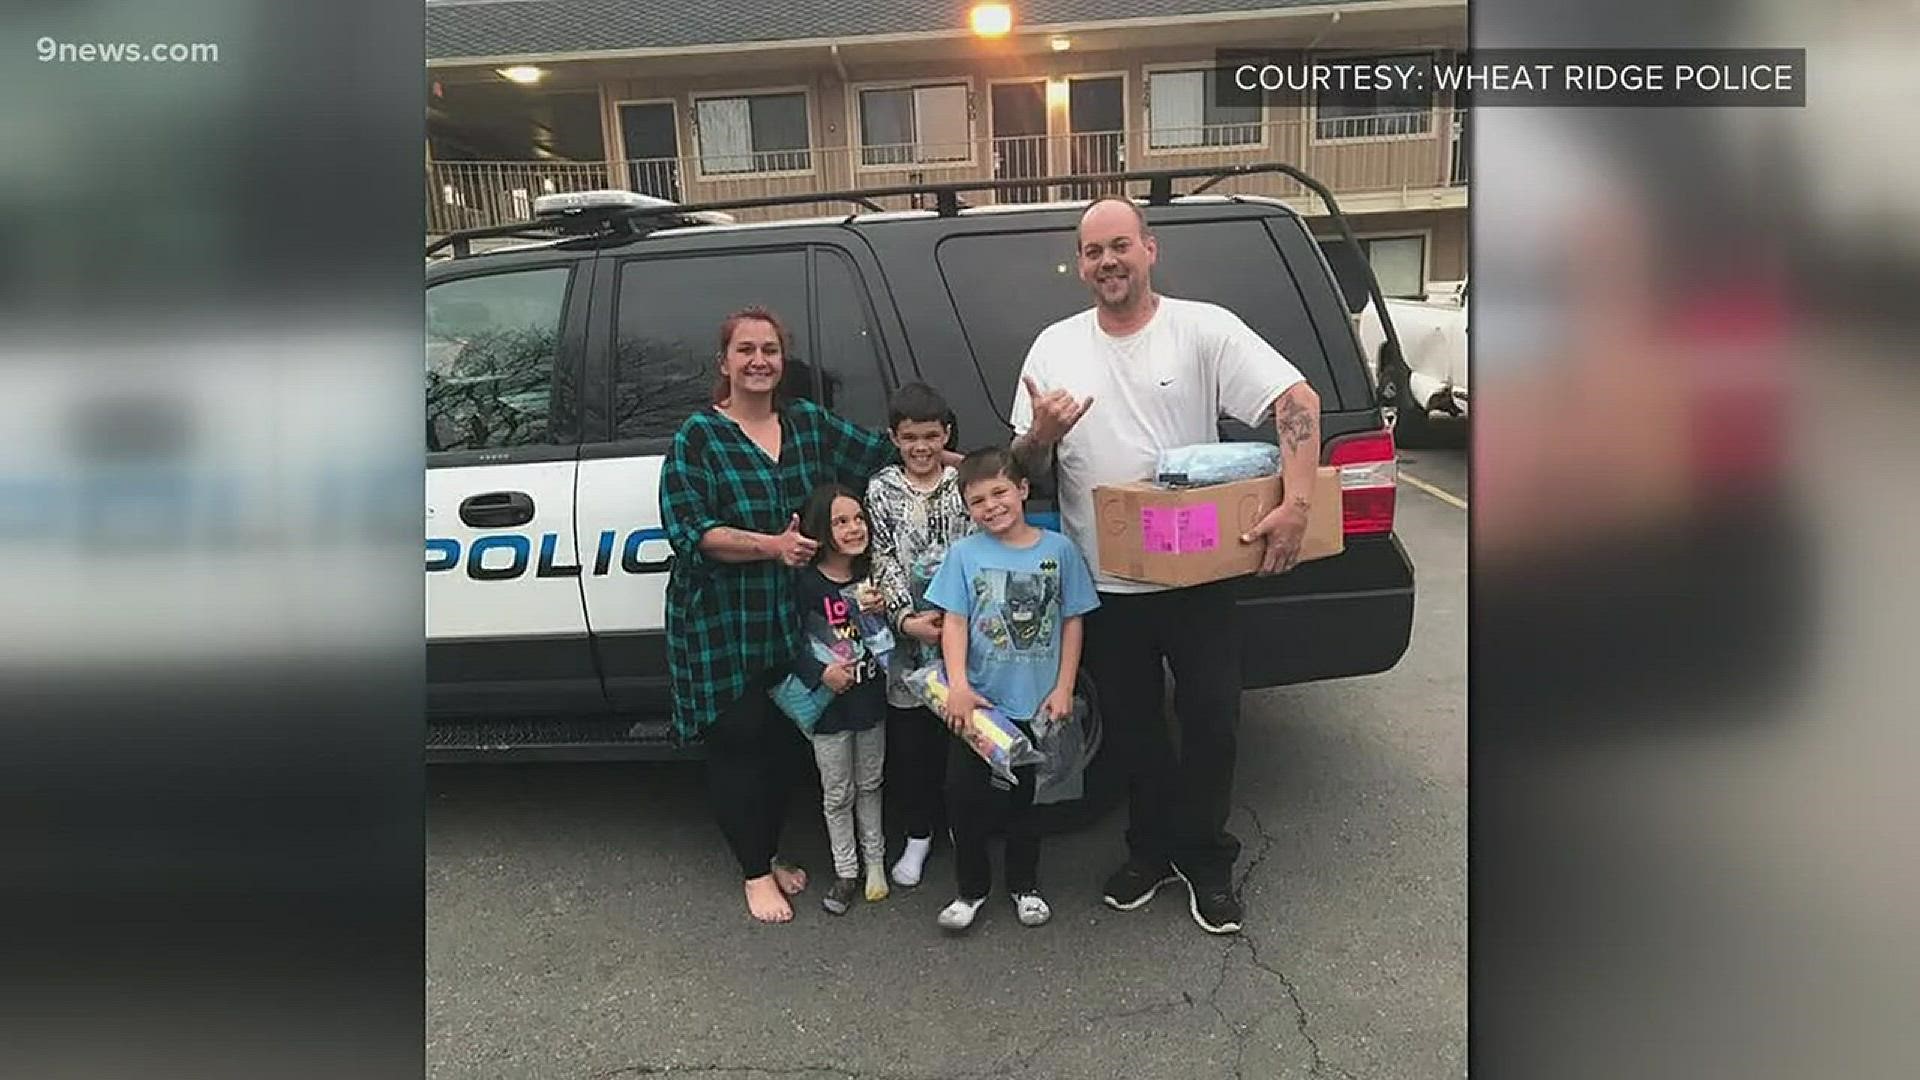 A family experiencing homelessness had a warm place to sleep for at least one night thanks to the generosity of a Wheat Ridge police officer.